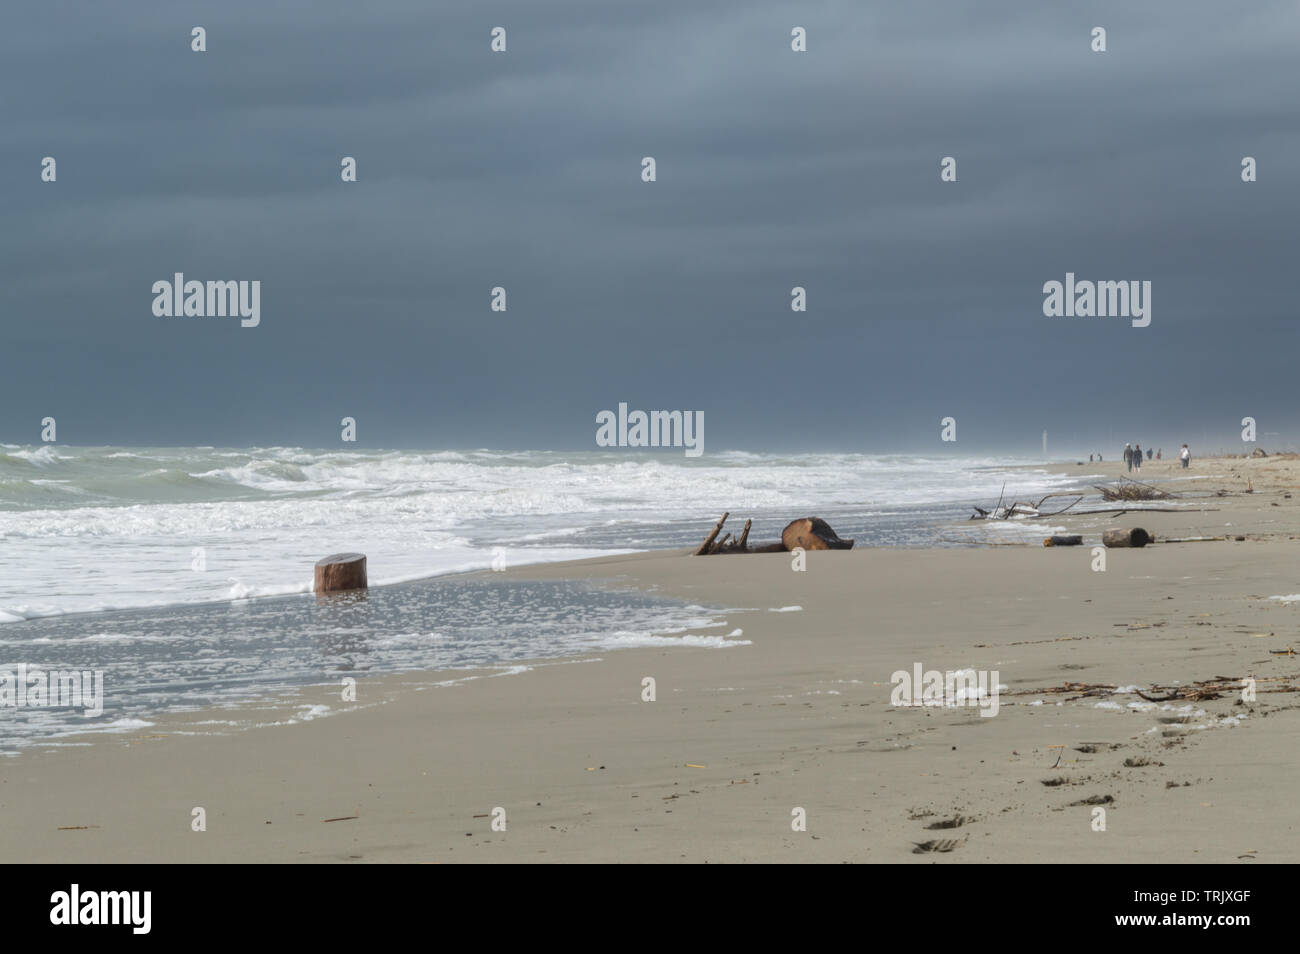 flotsam at the beach on a stormy day Stock Photo